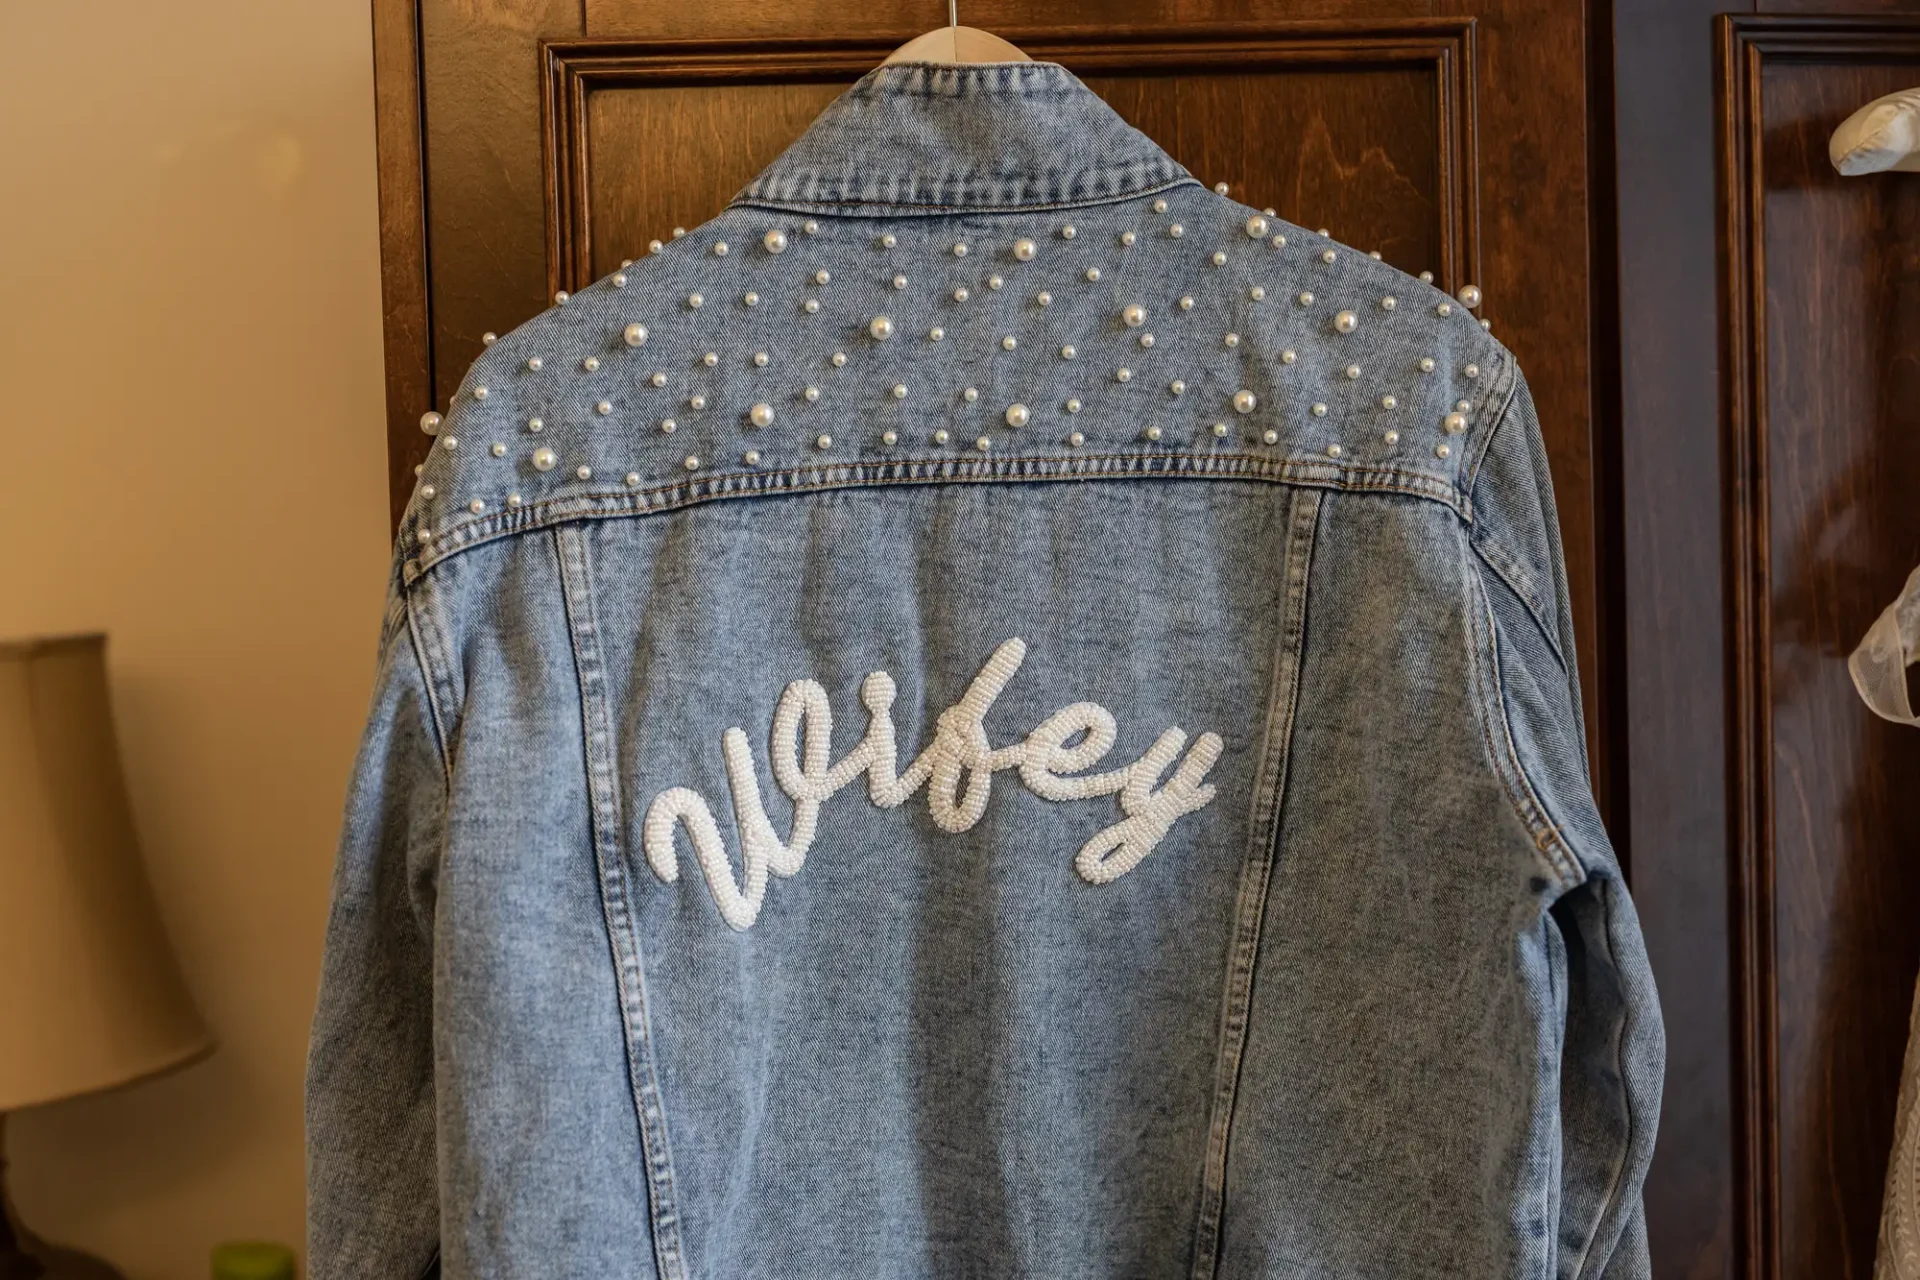 A denim jacket with the word "wifey" embroidered in white script and adorned with pearl embellishments, hanging on a wooden door.